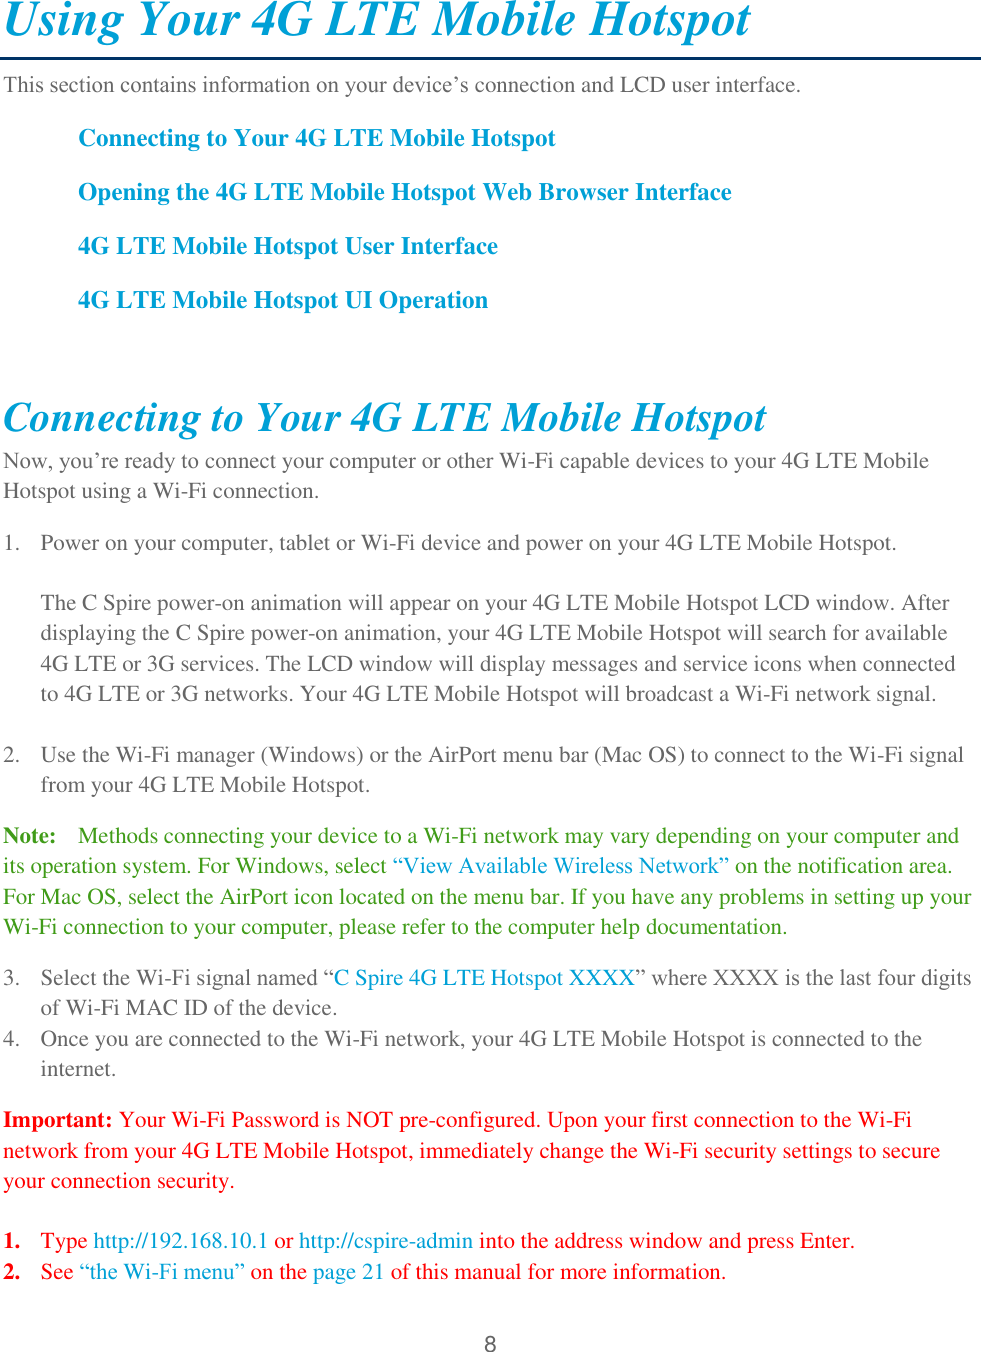 8  Using Your 4G LTE Mobile Hotspot  This section contains information on your device’s connection and LCD user interface. Connecting to Your 4G LTE Mobile Hotspot Opening the 4G LTE Mobile Hotspot Web Browser Interface  4G LTE Mobile Hotspot User Interface  4G LTE Mobile Hotspot UI Operation  Connecting to Your 4G LTE Mobile Hotspot Now, you’re ready to connect your computer or other Wi-Fi capable devices to your 4G LTE Mobile Hotspot using a Wi-Fi connection. 1. Power on your computer, tablet or Wi-Fi device and power on your 4G LTE Mobile Hotspot.  The C Spire power-on animation will appear on your 4G LTE Mobile Hotspot LCD window. After displaying the C Spire power-on animation, your 4G LTE Mobile Hotspot will search for available 4G LTE or 3G services. The LCD window will display messages and service icons when connected to 4G LTE or 3G networks. Your 4G LTE Mobile Hotspot will broadcast a Wi-Fi network signal.  2. Use the Wi-Fi manager (Windows) or the AirPort menu bar (Mac OS) to connect to the Wi-Fi signal from your 4G LTE Mobile Hotspot.  Note:   Methods connecting your device to a Wi-Fi network may vary depending on your computer and its operation system. For Windows, select ―View Available Wireless Network‖ on the notification area. For Mac OS, select the AirPort icon located on the menu bar. If you have any problems in setting up your Wi-Fi connection to your computer, please refer to the computer help documentation. 3. Select the Wi-Fi signal named ―C Spire 4G LTE Hotspot XXXX‖ where XXXX is the last four digits of Wi-Fi MAC ID of the device.  4. Once you are connected to the Wi-Fi network, your 4G LTE Mobile Hotspot is connected to the internet.  Important: Your Wi-Fi Password is NOT pre-configured. Upon your first connection to the Wi-Fi network from your 4G LTE Mobile Hotspot, immediately change the Wi-Fi security settings to secure your connection security.   1. Type http://192.168.10.1 or http://cspire-admin into the address window and press Enter. 2. See ―the Wi-Fi menu‖ on the page 21 of this manual for more information. 